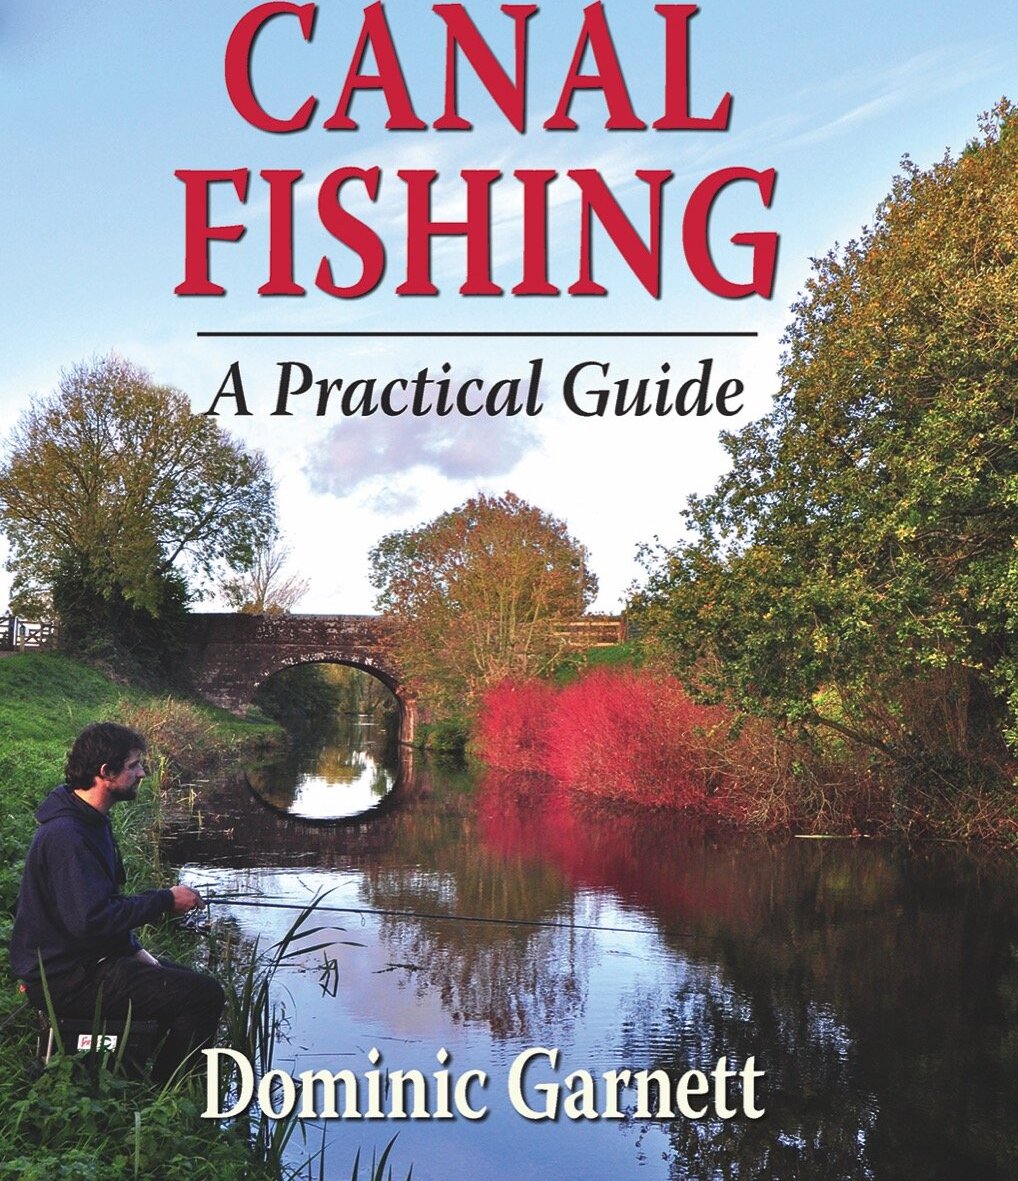 Canal Fishing: A Practical Guide [Book]